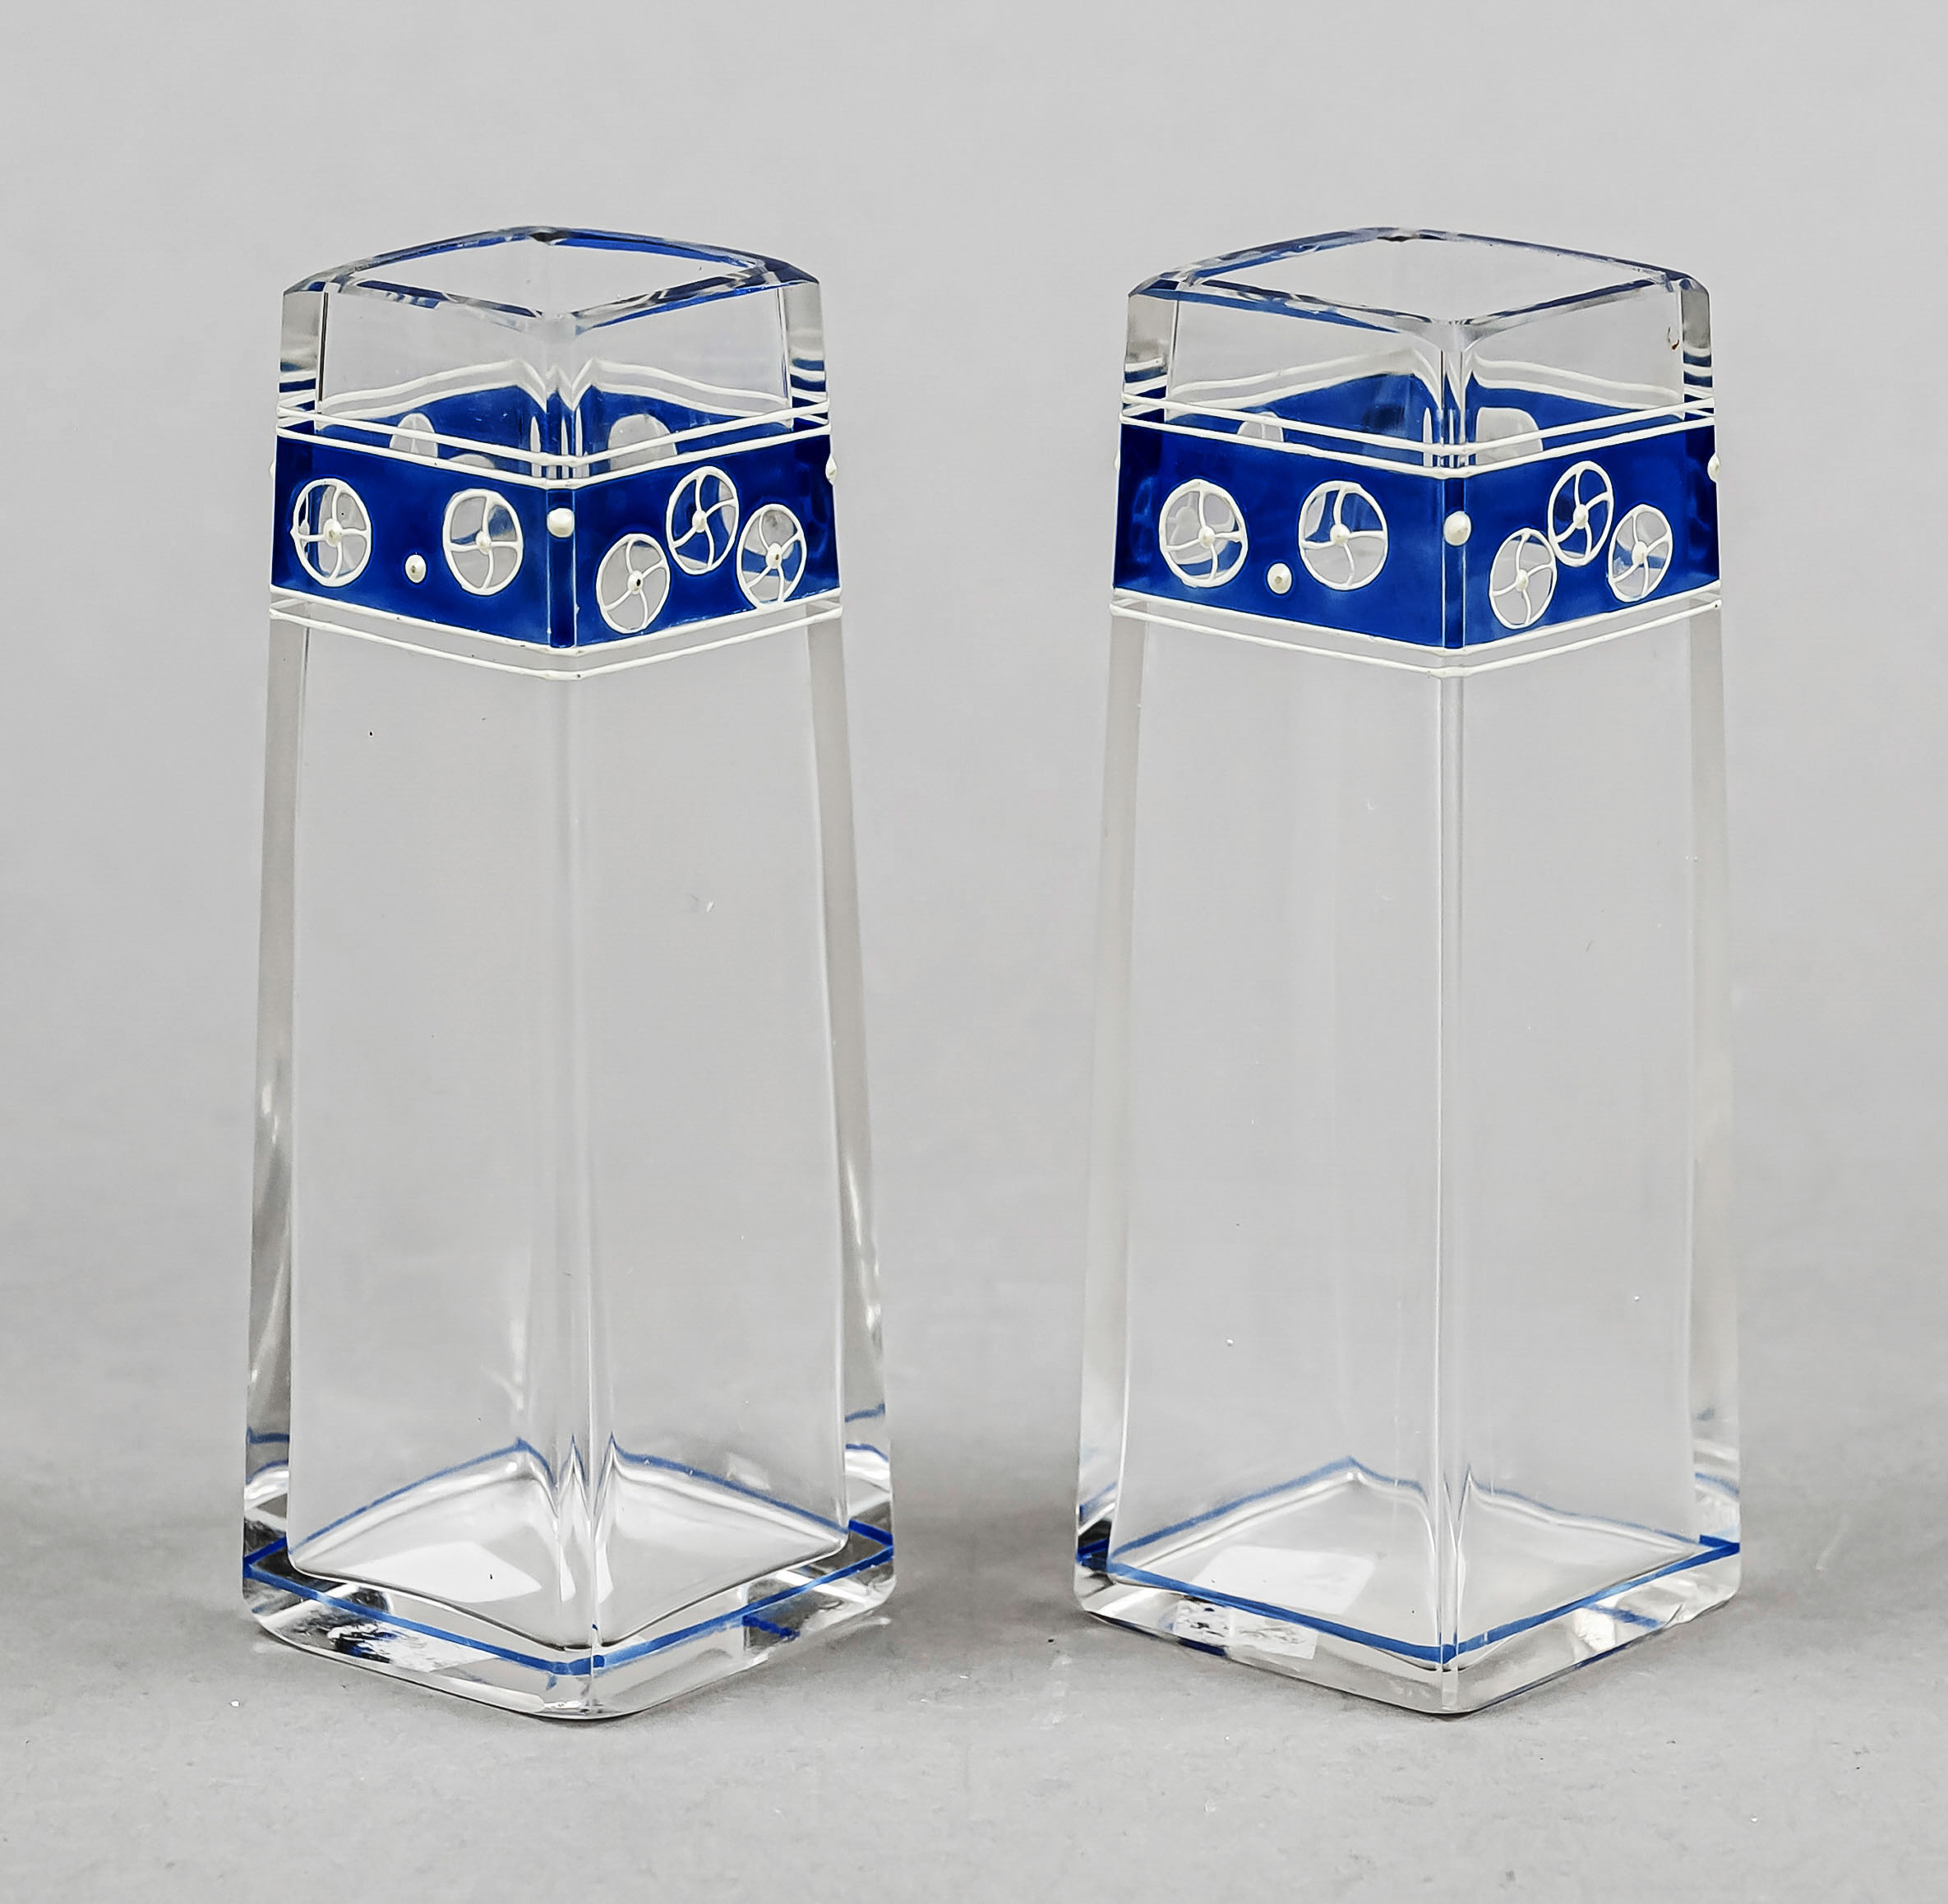 Pair of Art Nouveau vases, c. 1910, square base, angular body with tapering walls, clear glass